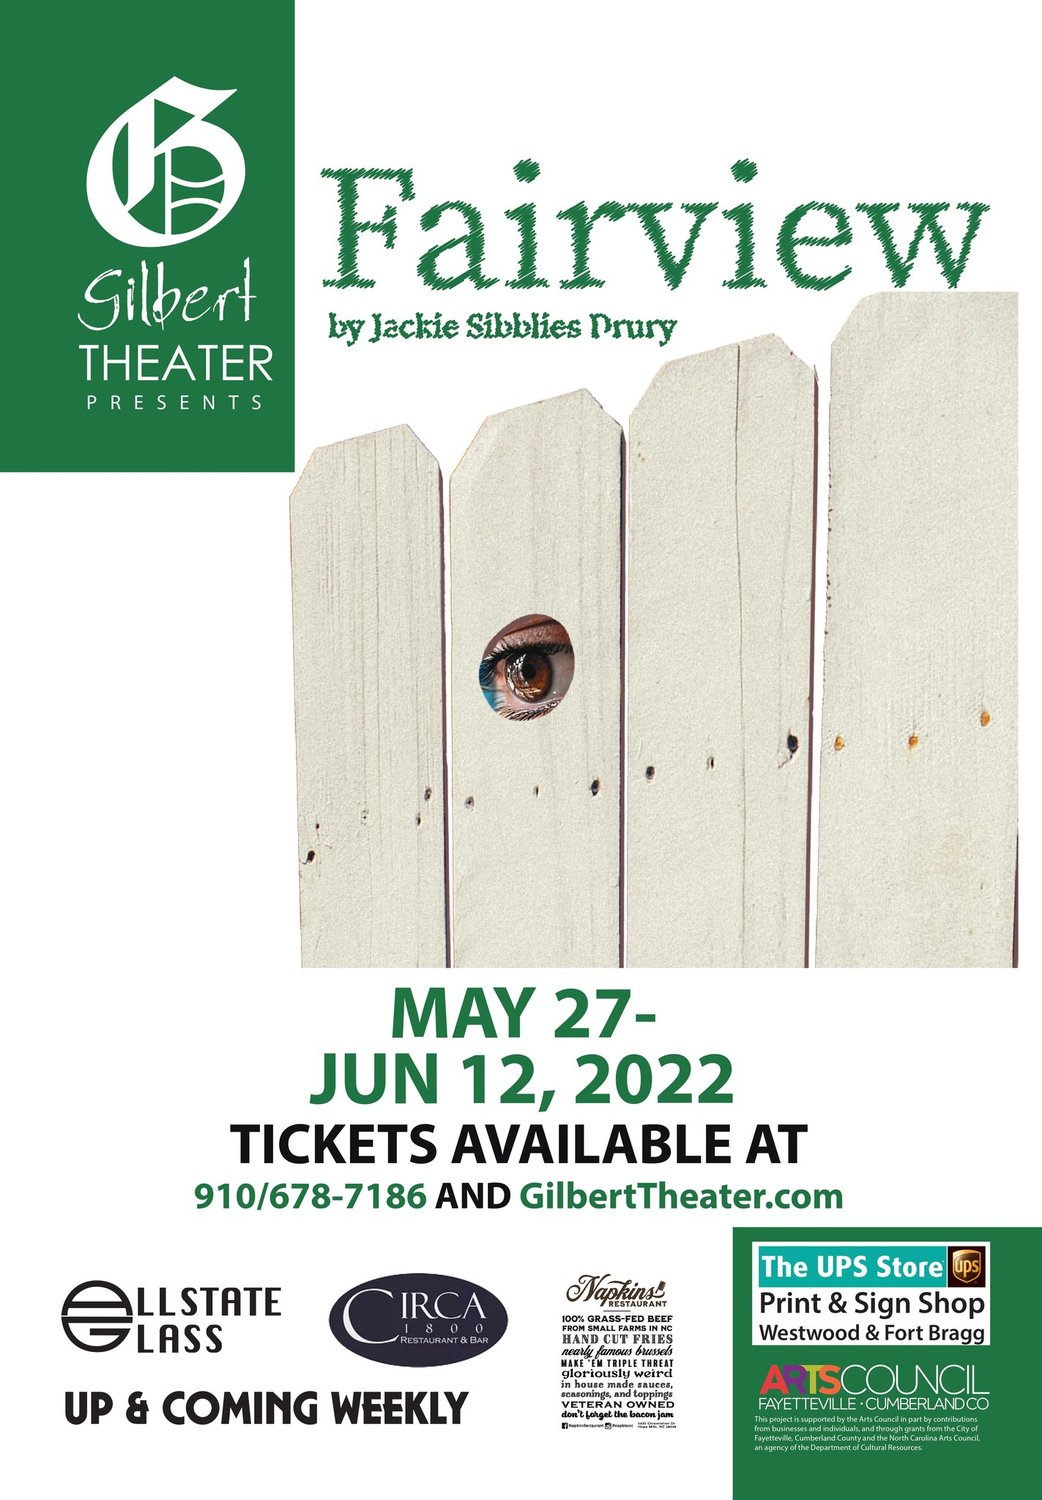 “Fairview’’ runs through Sunday, June 12, with shows on Fridays at 8 p.m., Saturdays at 2 p.m. and 8 p.m., and Sundays at 2 p.m. Tickets can be purchased at gilberttheater.com.